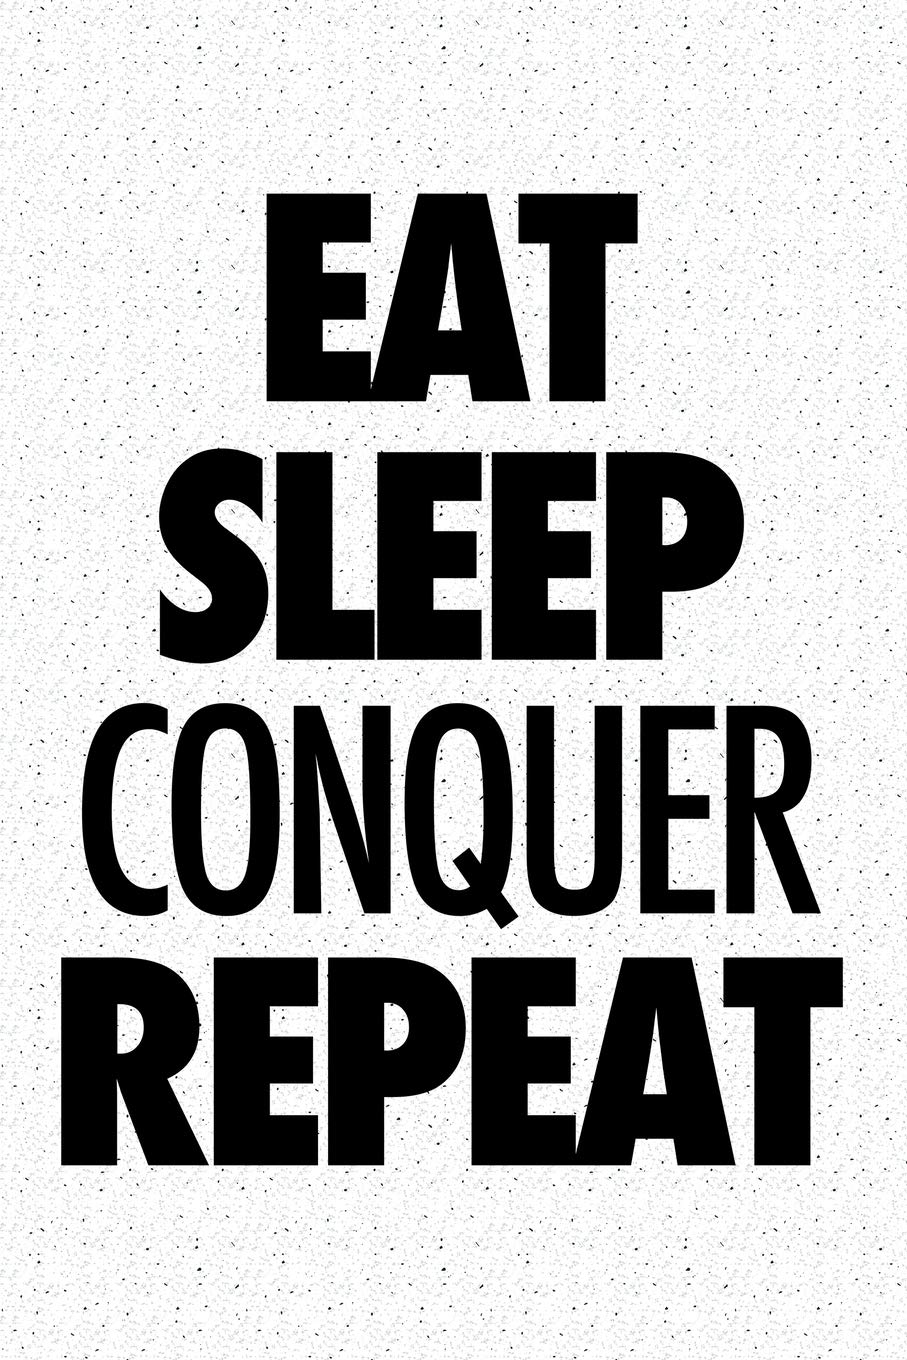 Amazon.in: Buy Eat Sleep Conquer Repeat: A 6x9 Inch Matte Softcover Notebook Journal with 120 Blank Lined Pages and a Foodie Cover Slogan Book Online at Low Prices in India